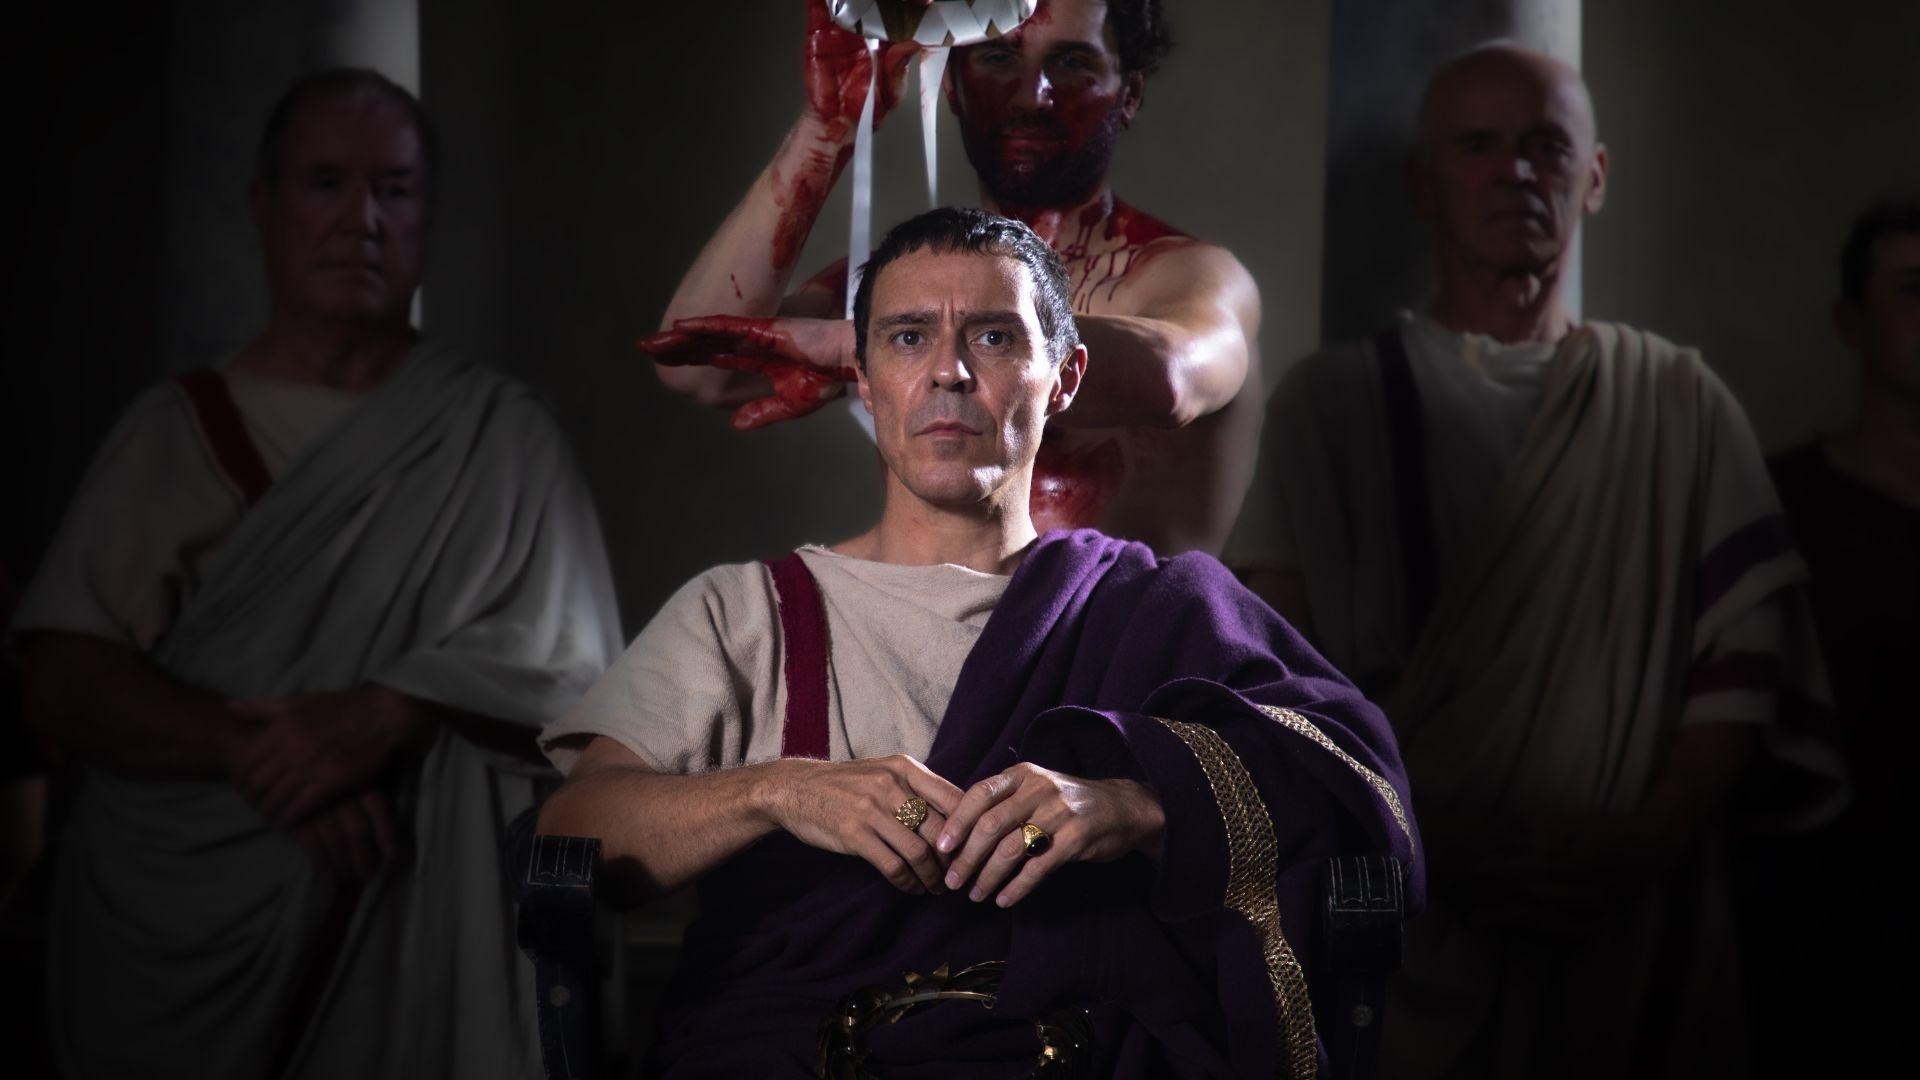 Caesar (Andonis Anthony) sits as people behind him stand and christen him.